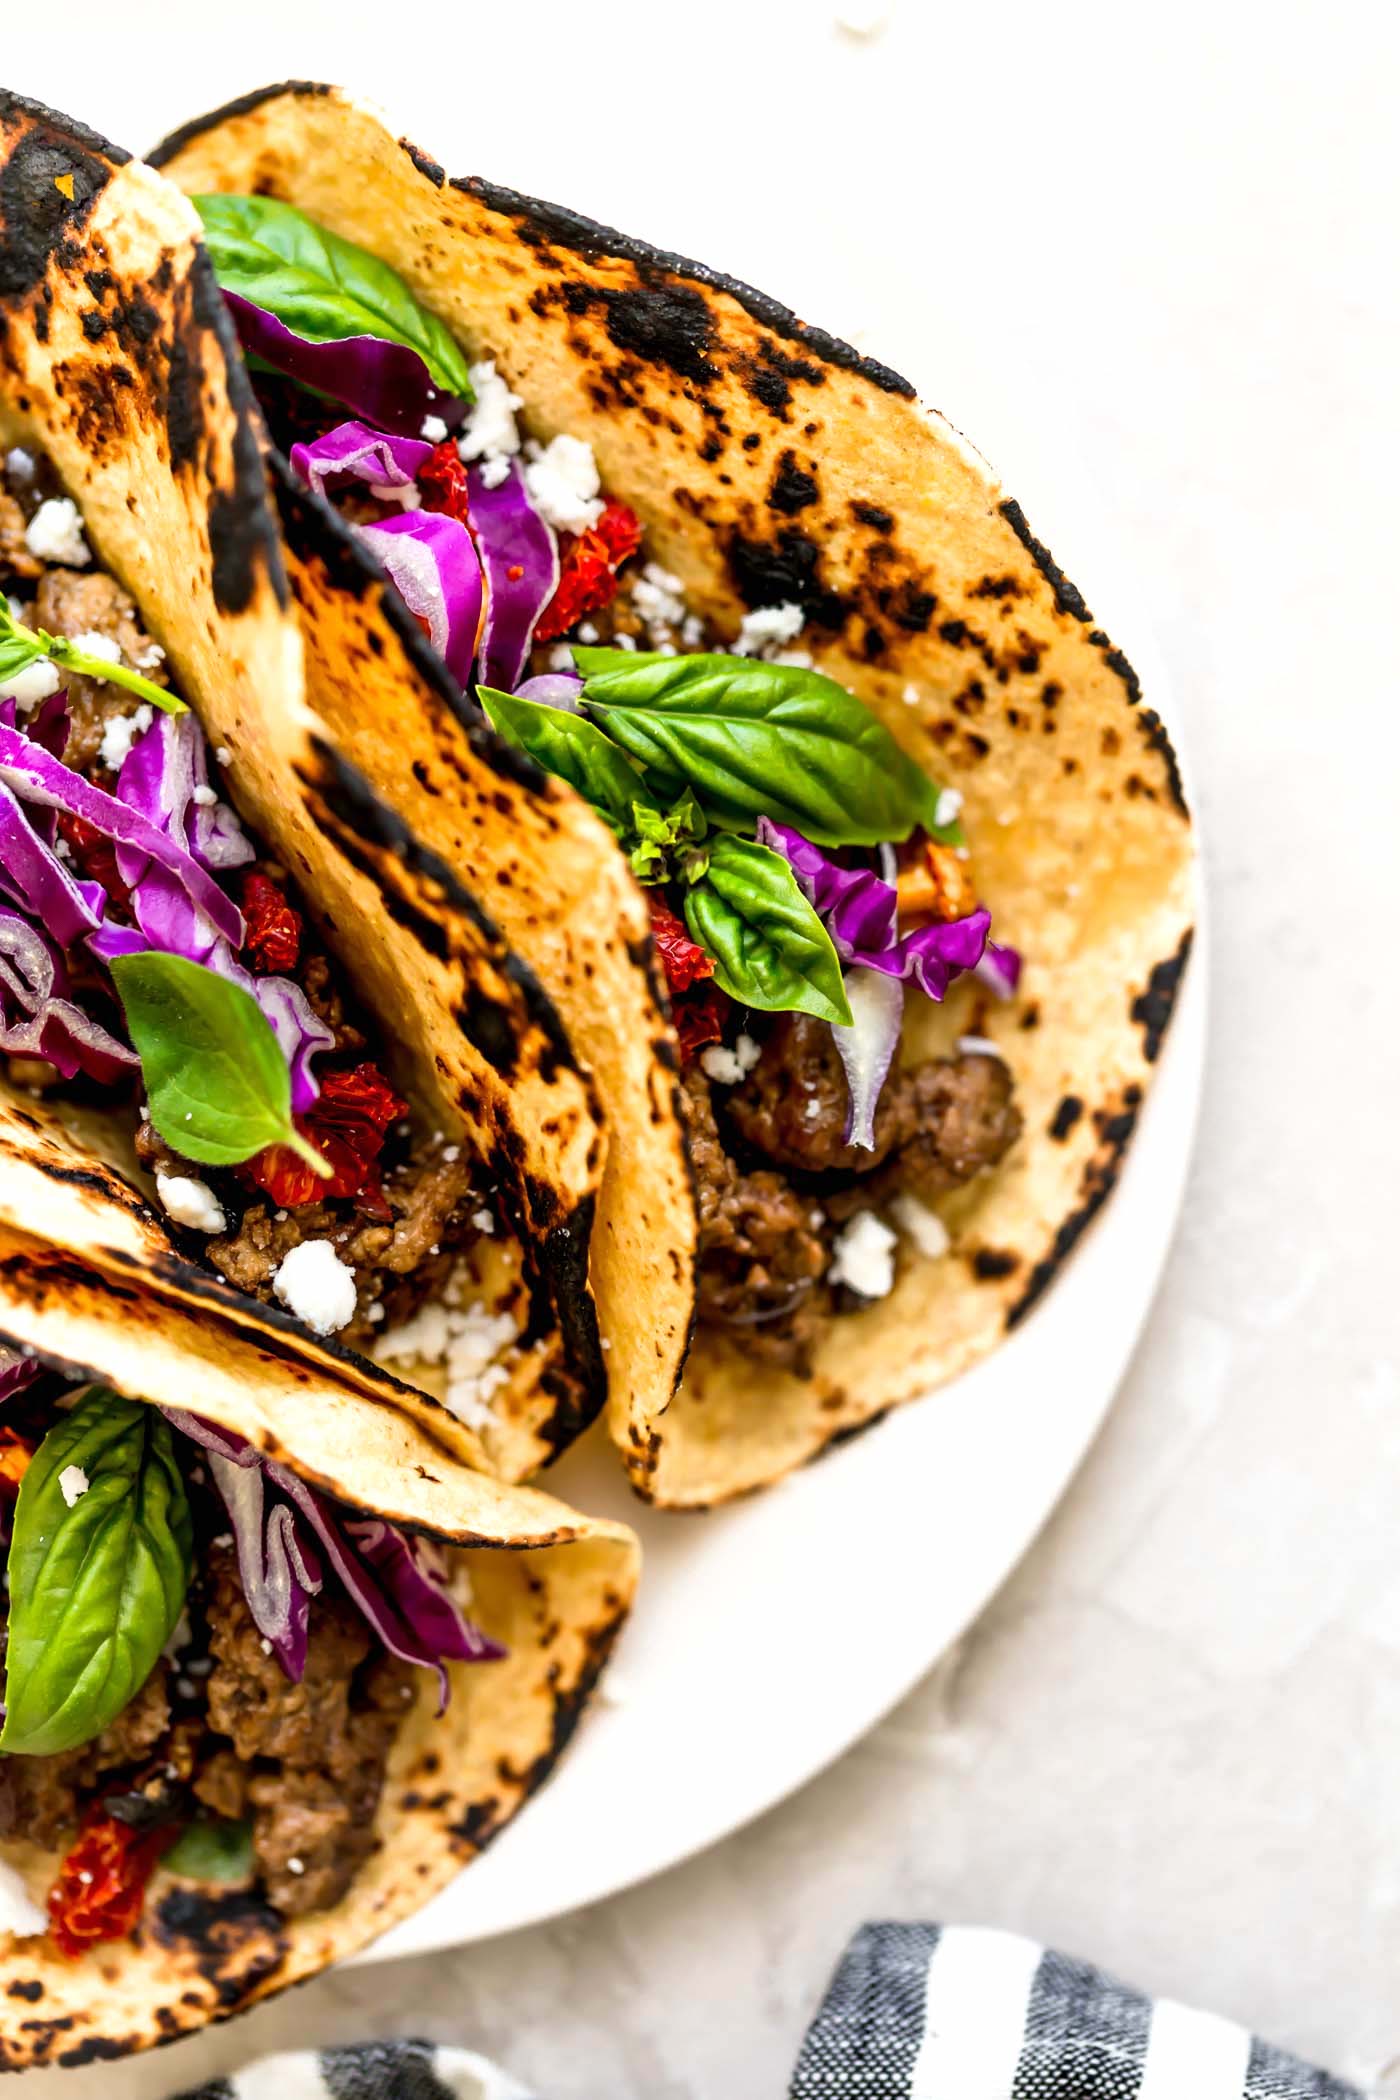 Greek lamb tacos in charred tortillas with red cabbage and fresh herbs on top